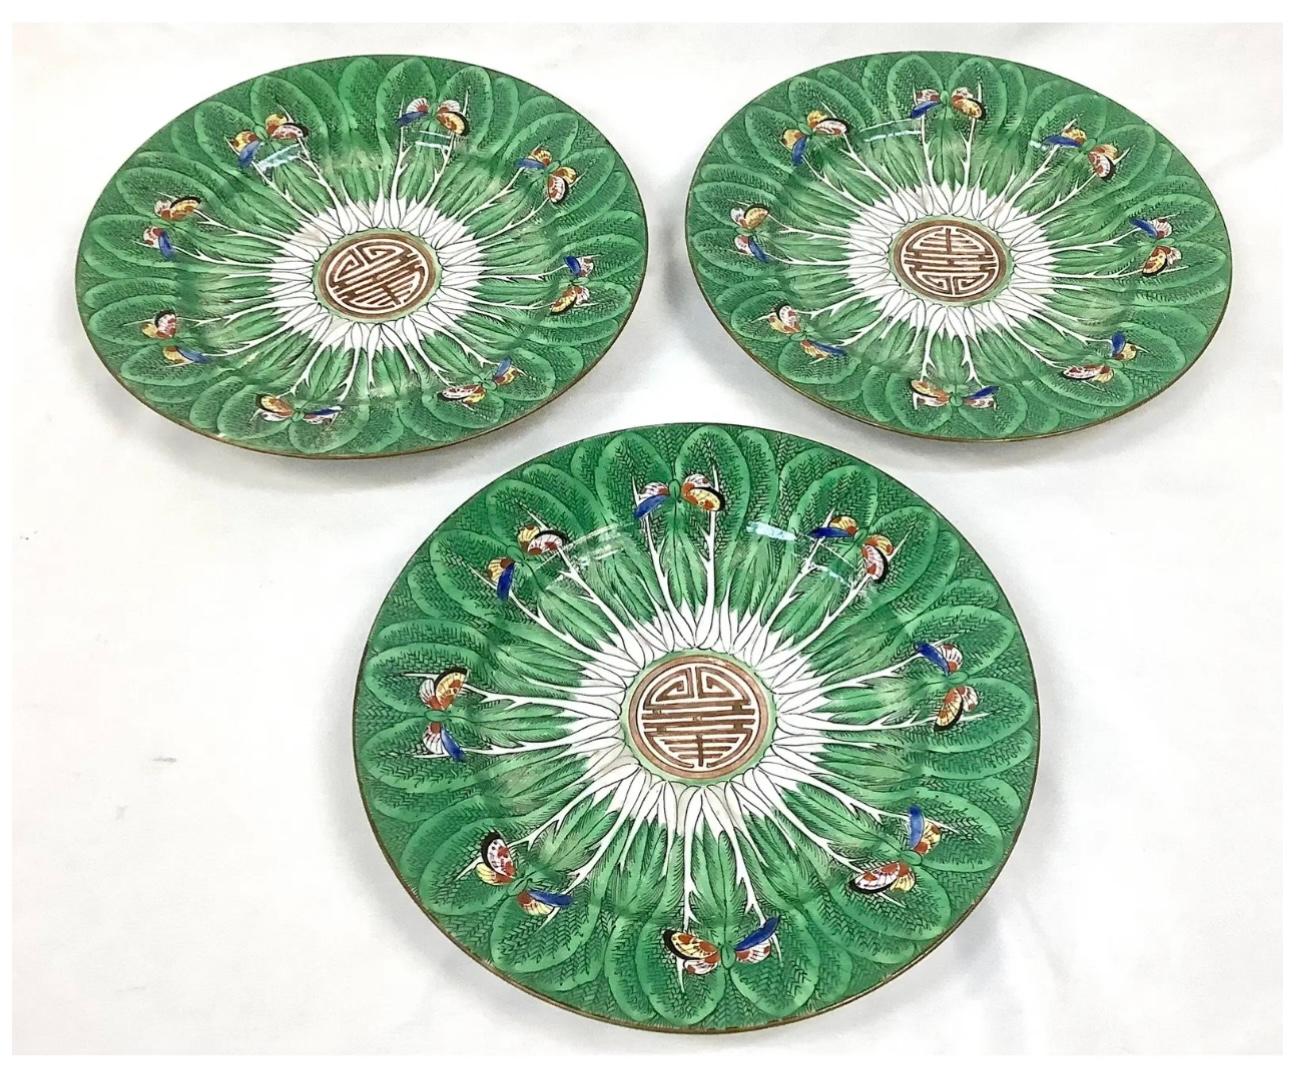 Set of 3 beautiful Chinese export porcelain green cabbage leaf butterfly plate. Colors or white, blue, yellow and red throughout. Contains gold central medallion and gilt rim. Excellent condition with no chips or cracks.

